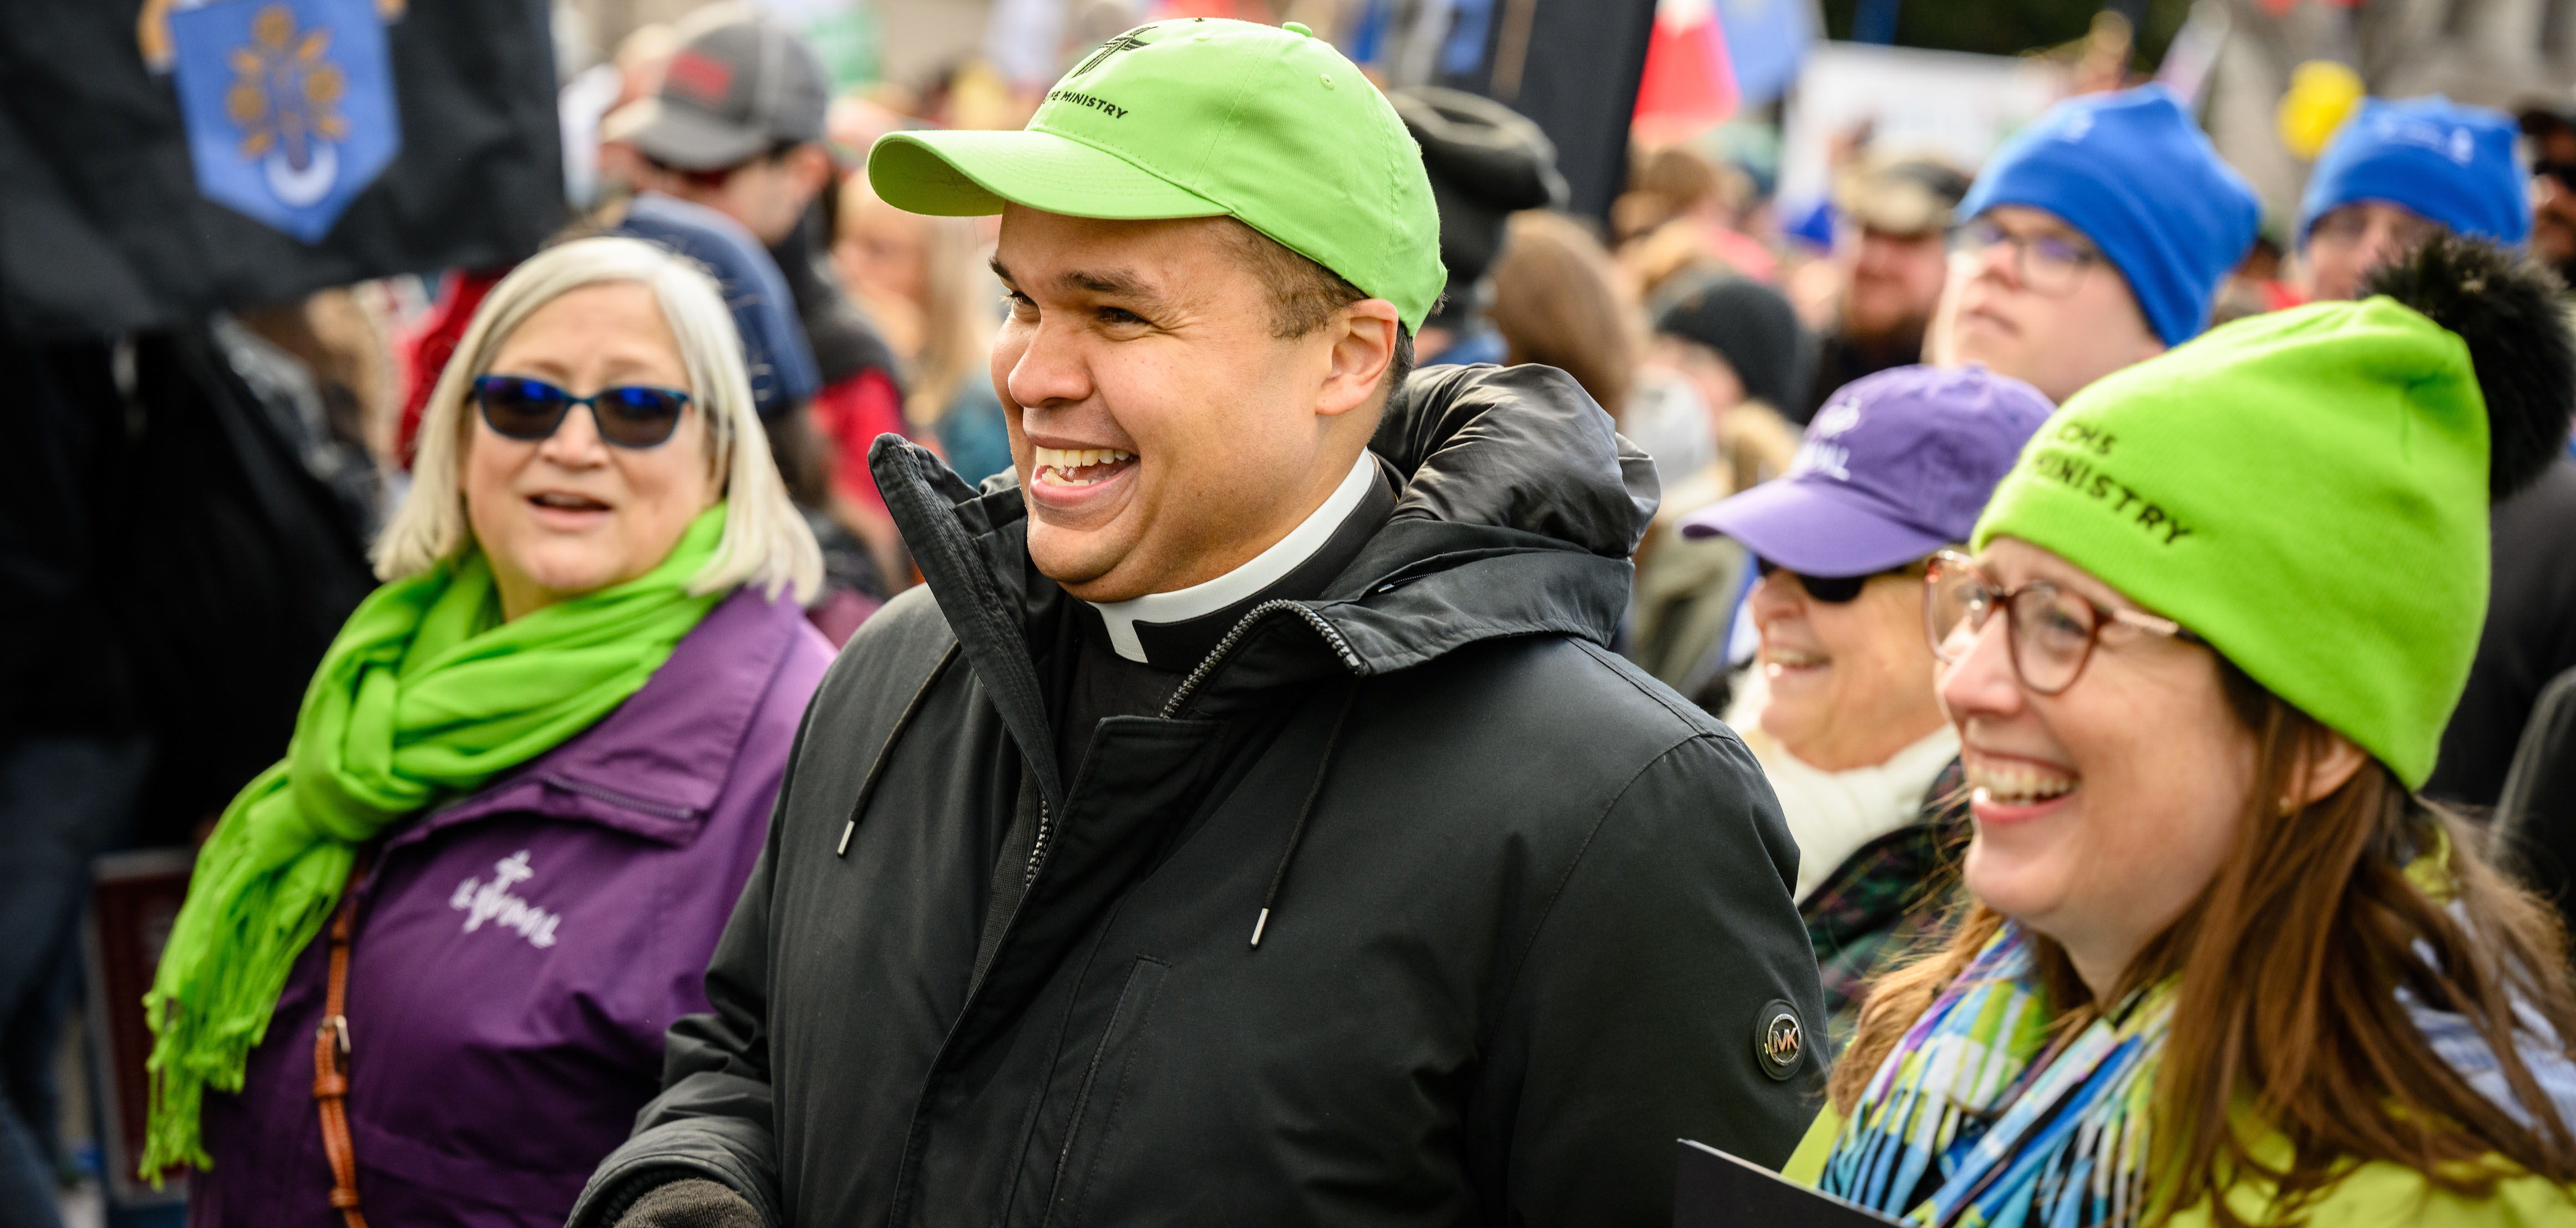 Lutherans joined thousands of other pro-life advocates for the 2023 National March for Life held in Washington, D.C., on Jan. 20.